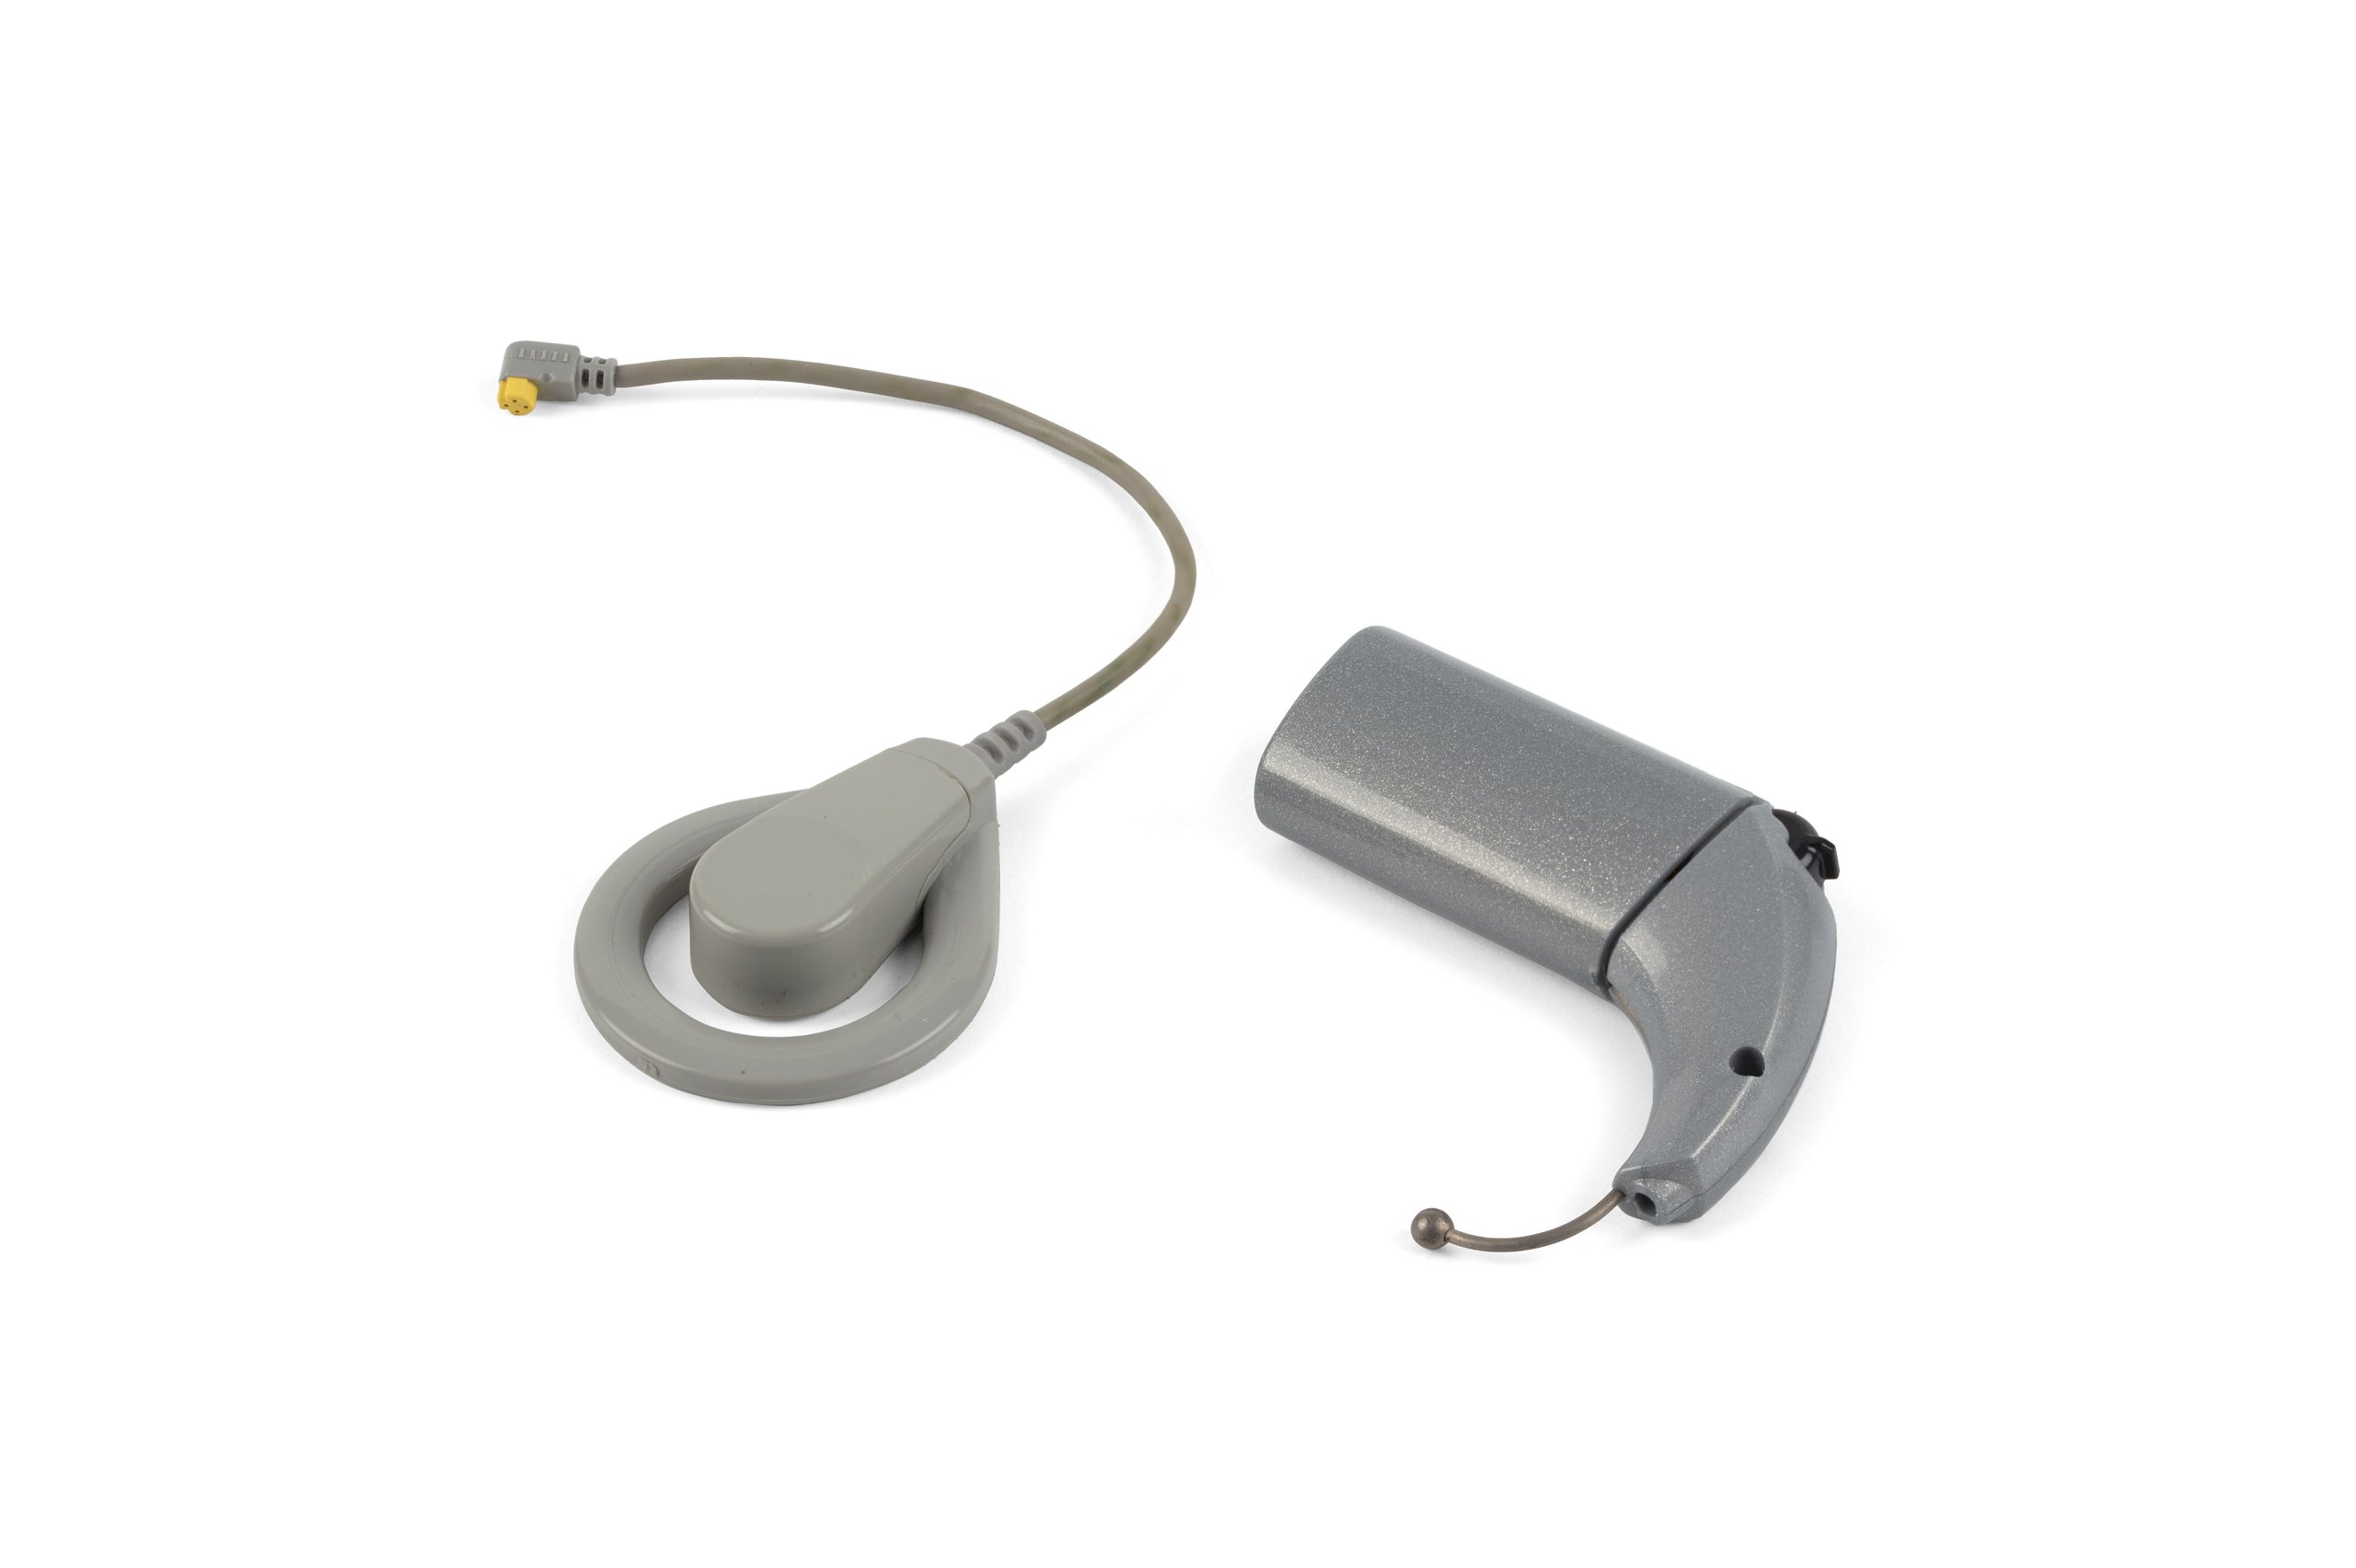 Cochlear 'ESPrit 3G' behind-the-ear speech processor and transmitters